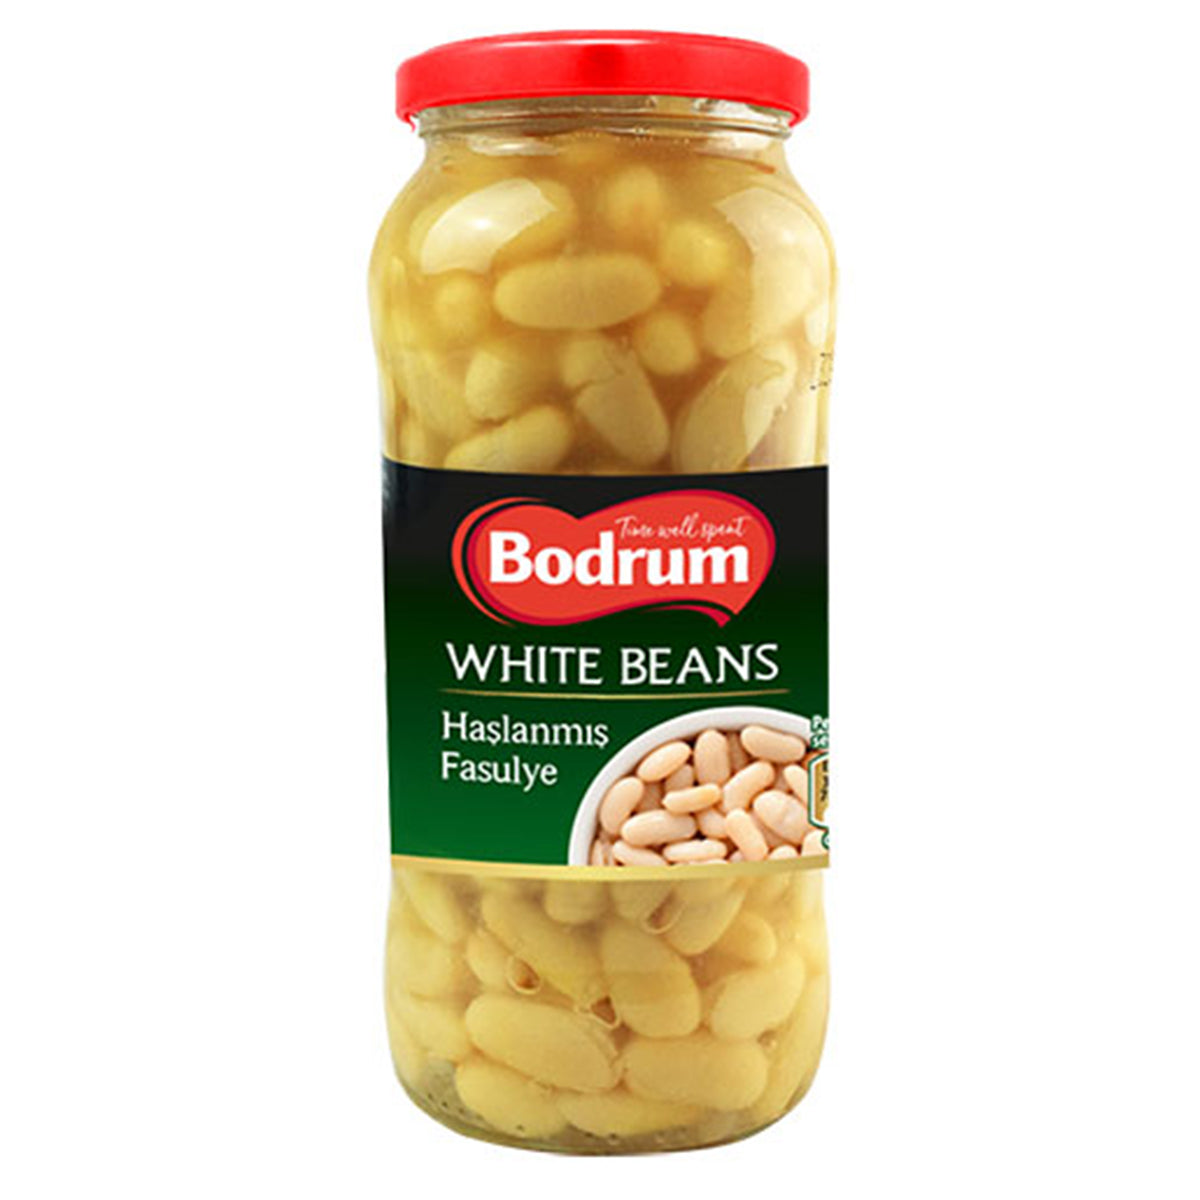 Bodrum - White Beans in Jar - 540g - Continental Food Store